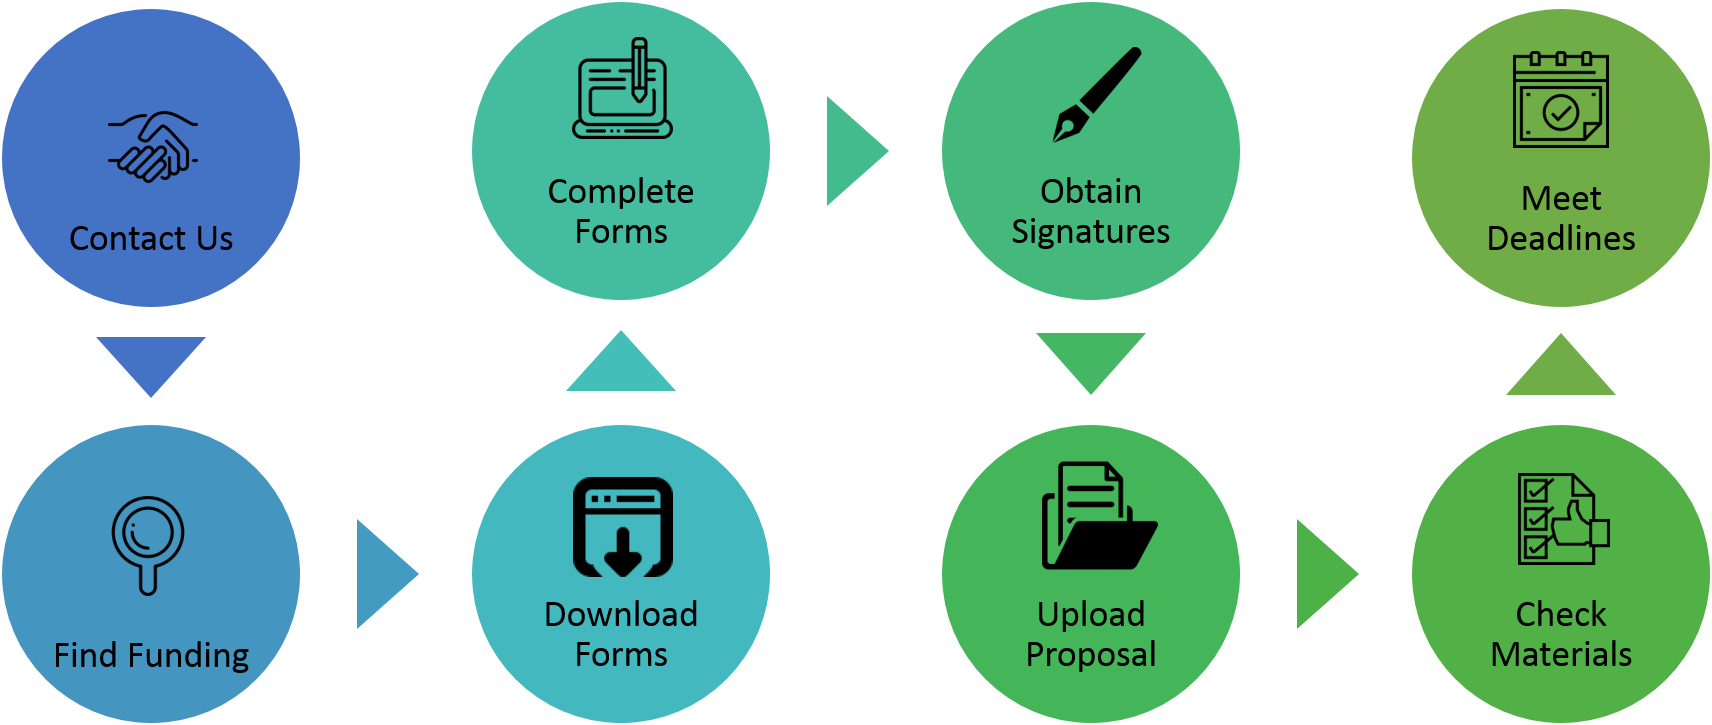 A flowchart detailing the pre-award process. In order: Contact Us, Find Funding, Download Forms, Complete Forms, Obtain Signatures, Upload Proposal, Check Materials, Meet Deadlines